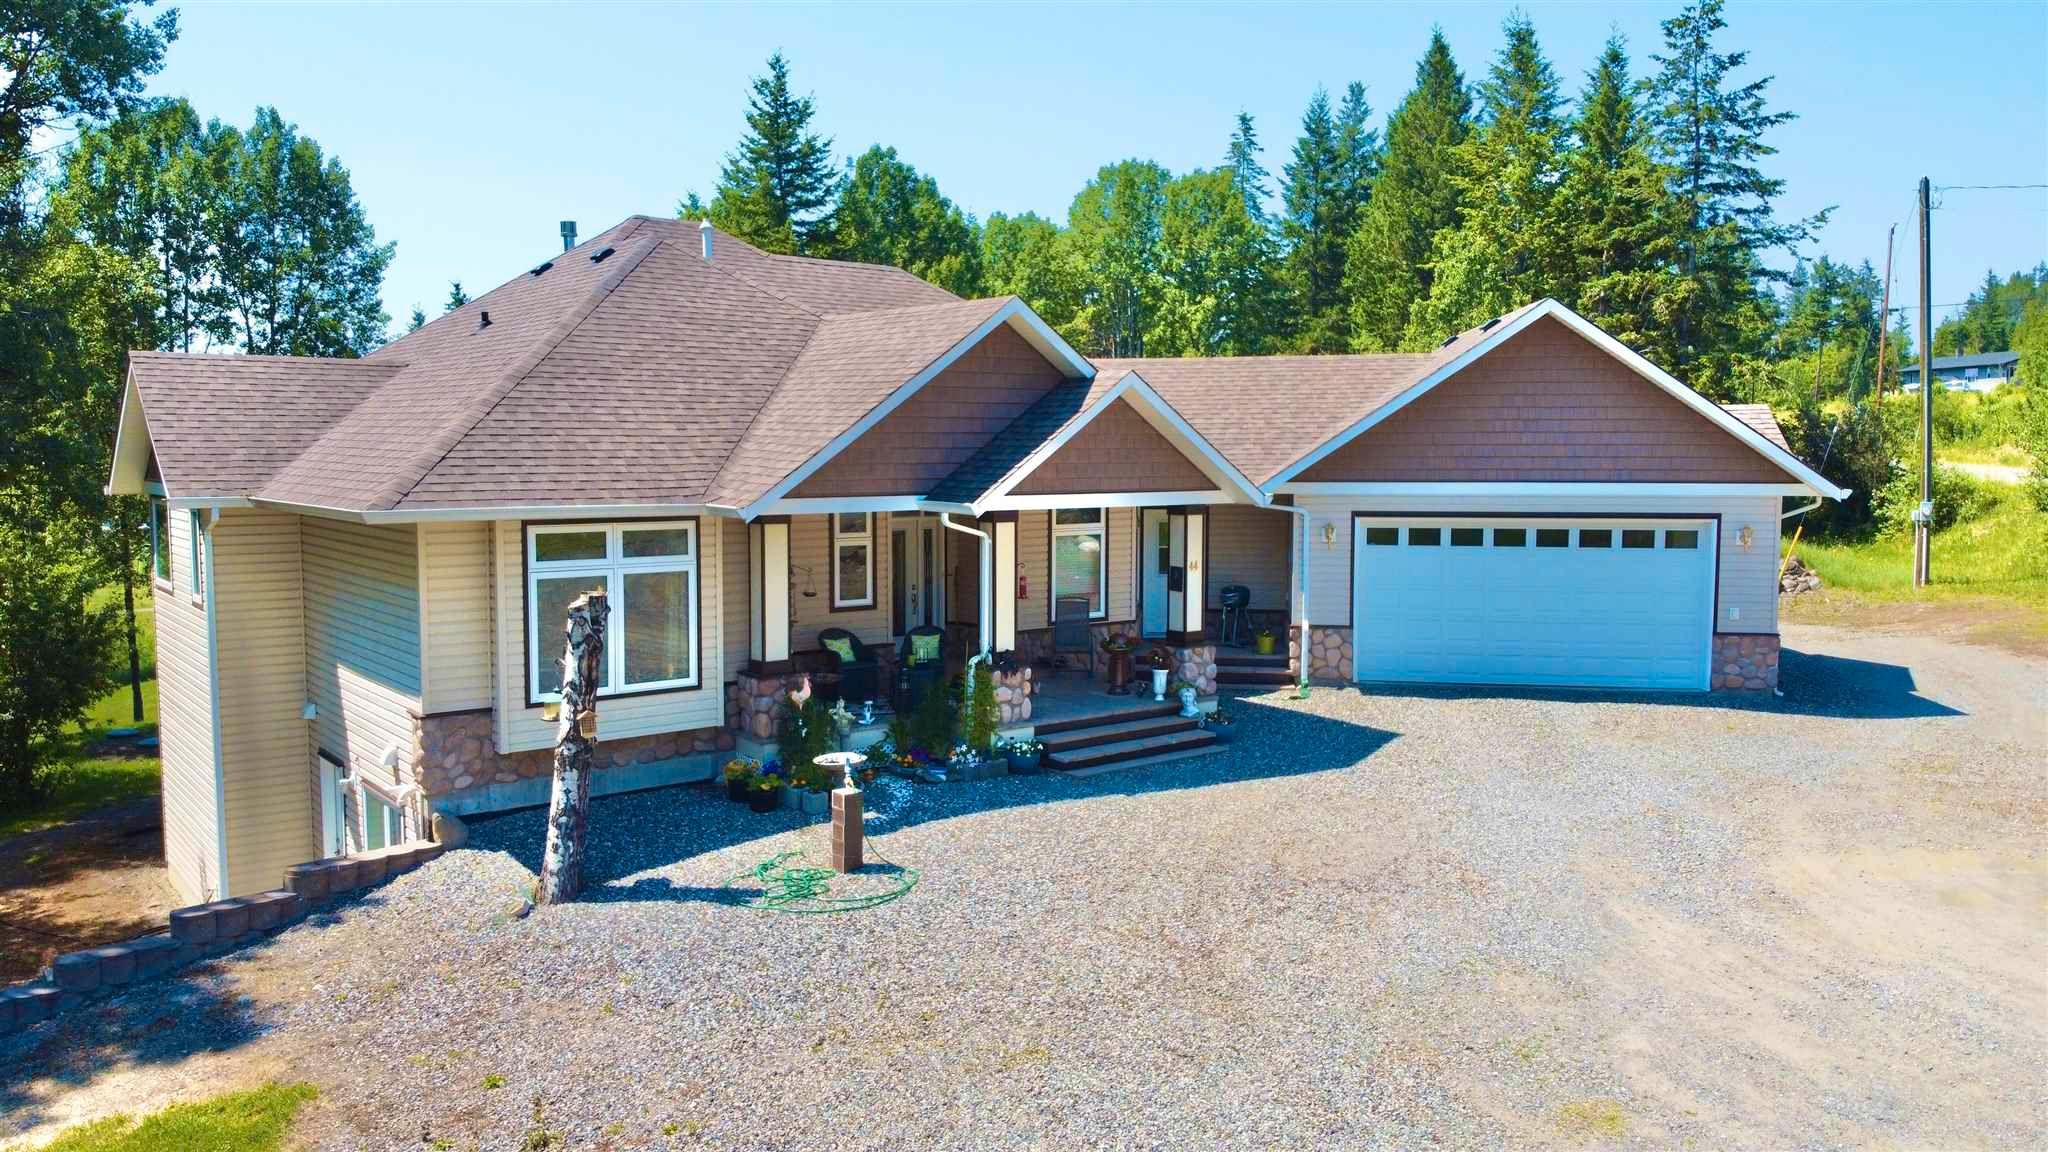 New property listed in 150 Mile House, Williams Lake (Zone 27)